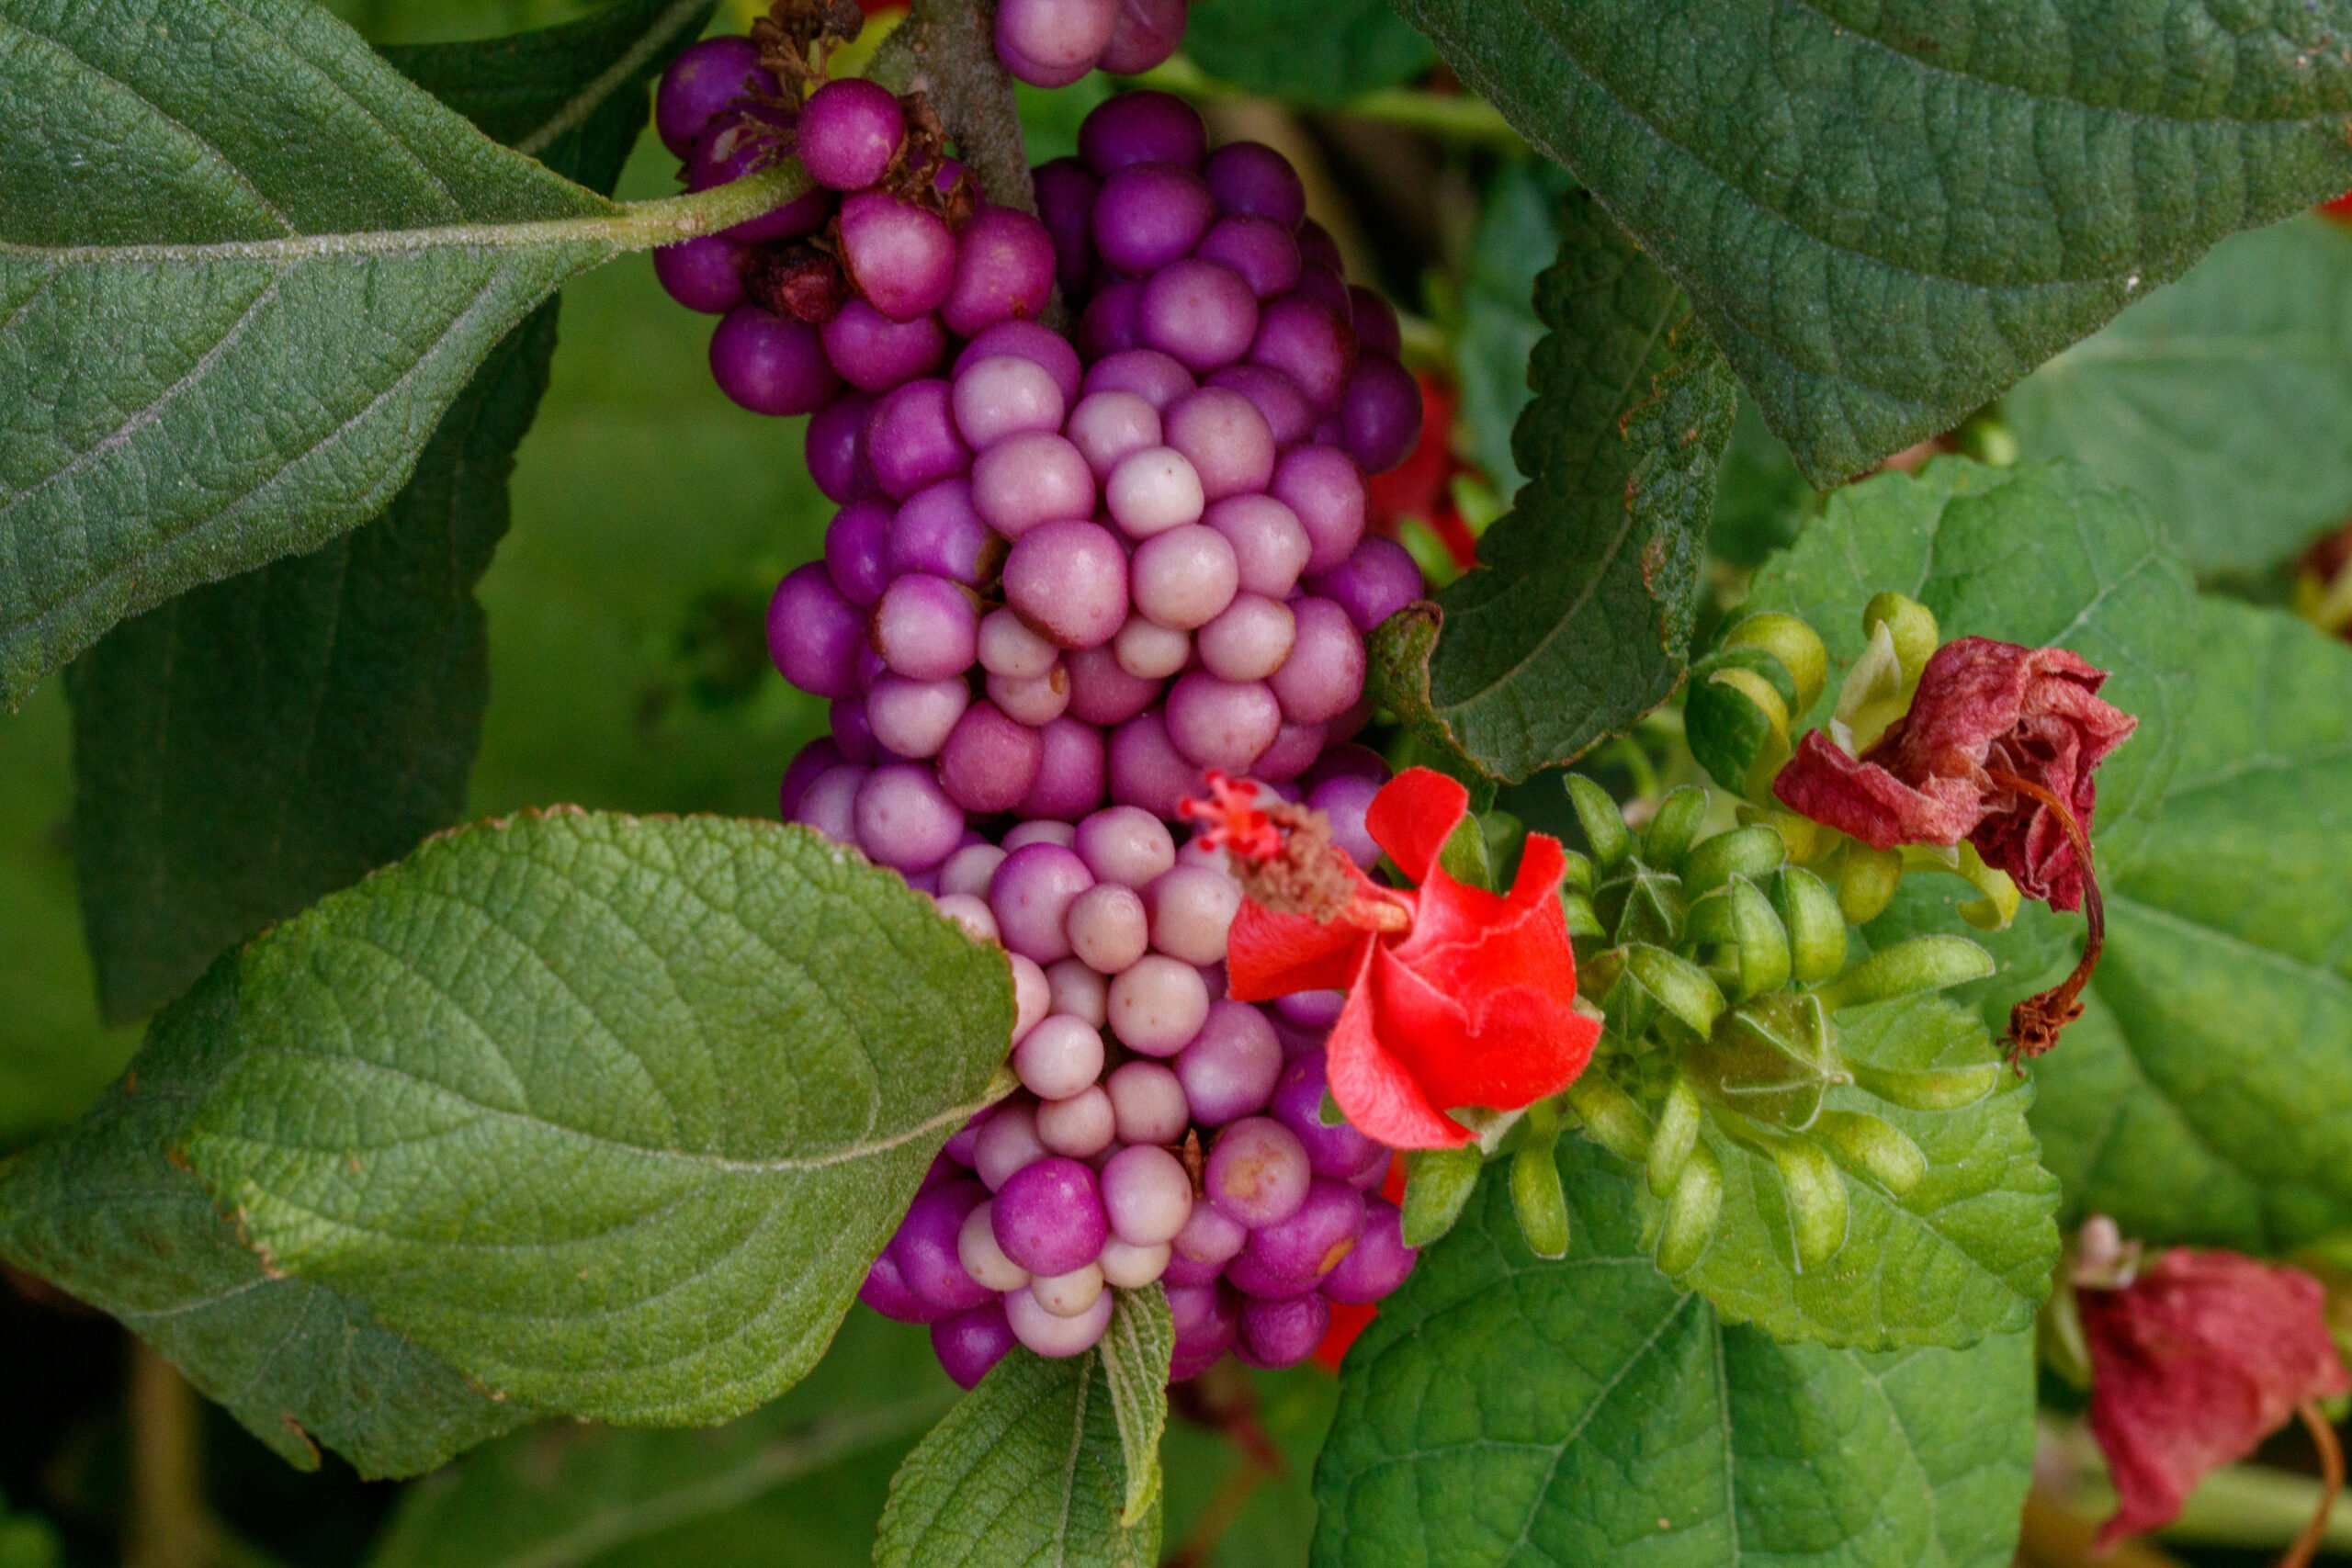 Purple berries, which form on the American beautyberry (Callicarpa americana) plant in the fall, sit behind red Turk's cap (Malvaviscus arboreus) blooms at the San Antonio Botanical Garden.